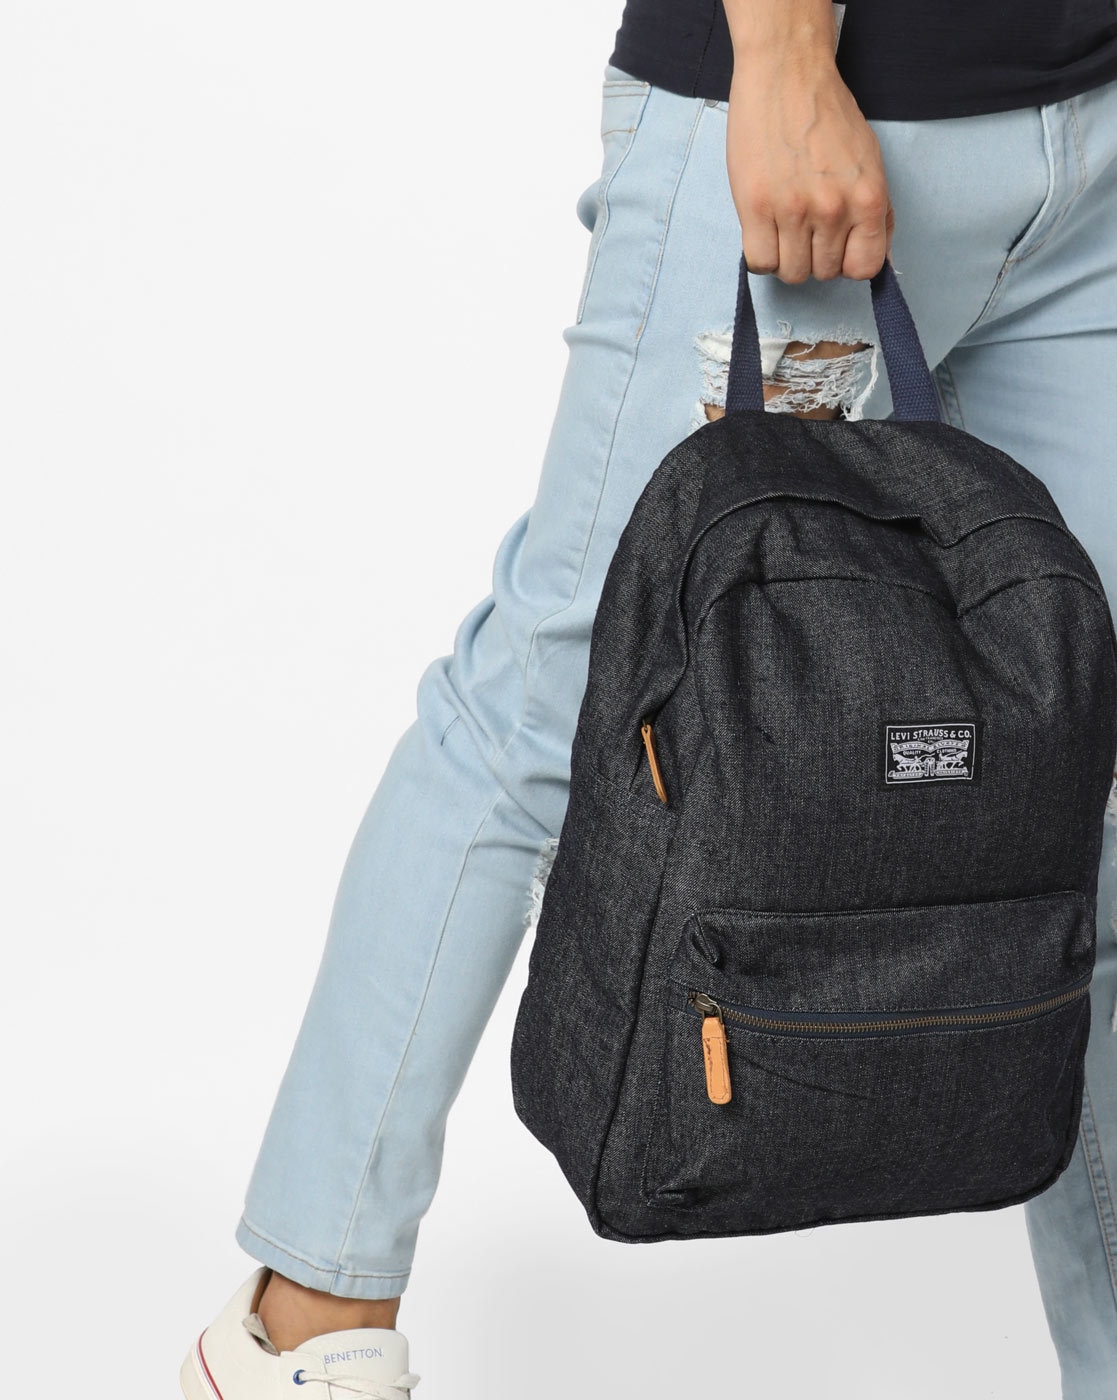 Buy Navy Blue Laptop Bags for Men by LEVIS Online 